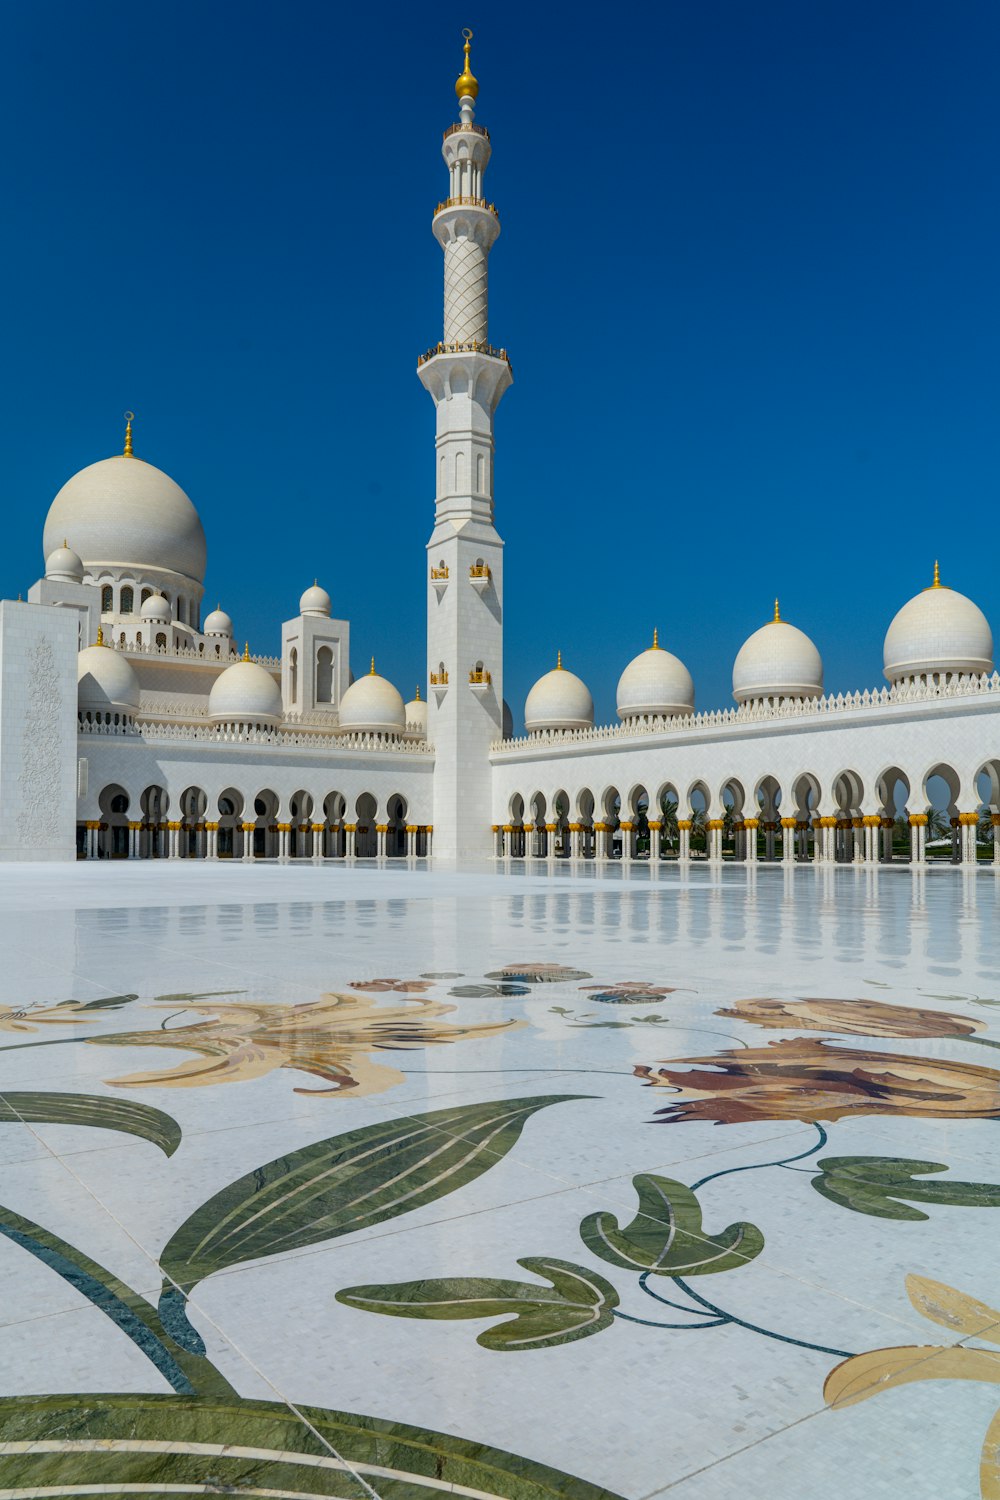 550+ Sheikh Zayed Grand Mosque Pictures | Download Free Images on Unsplash